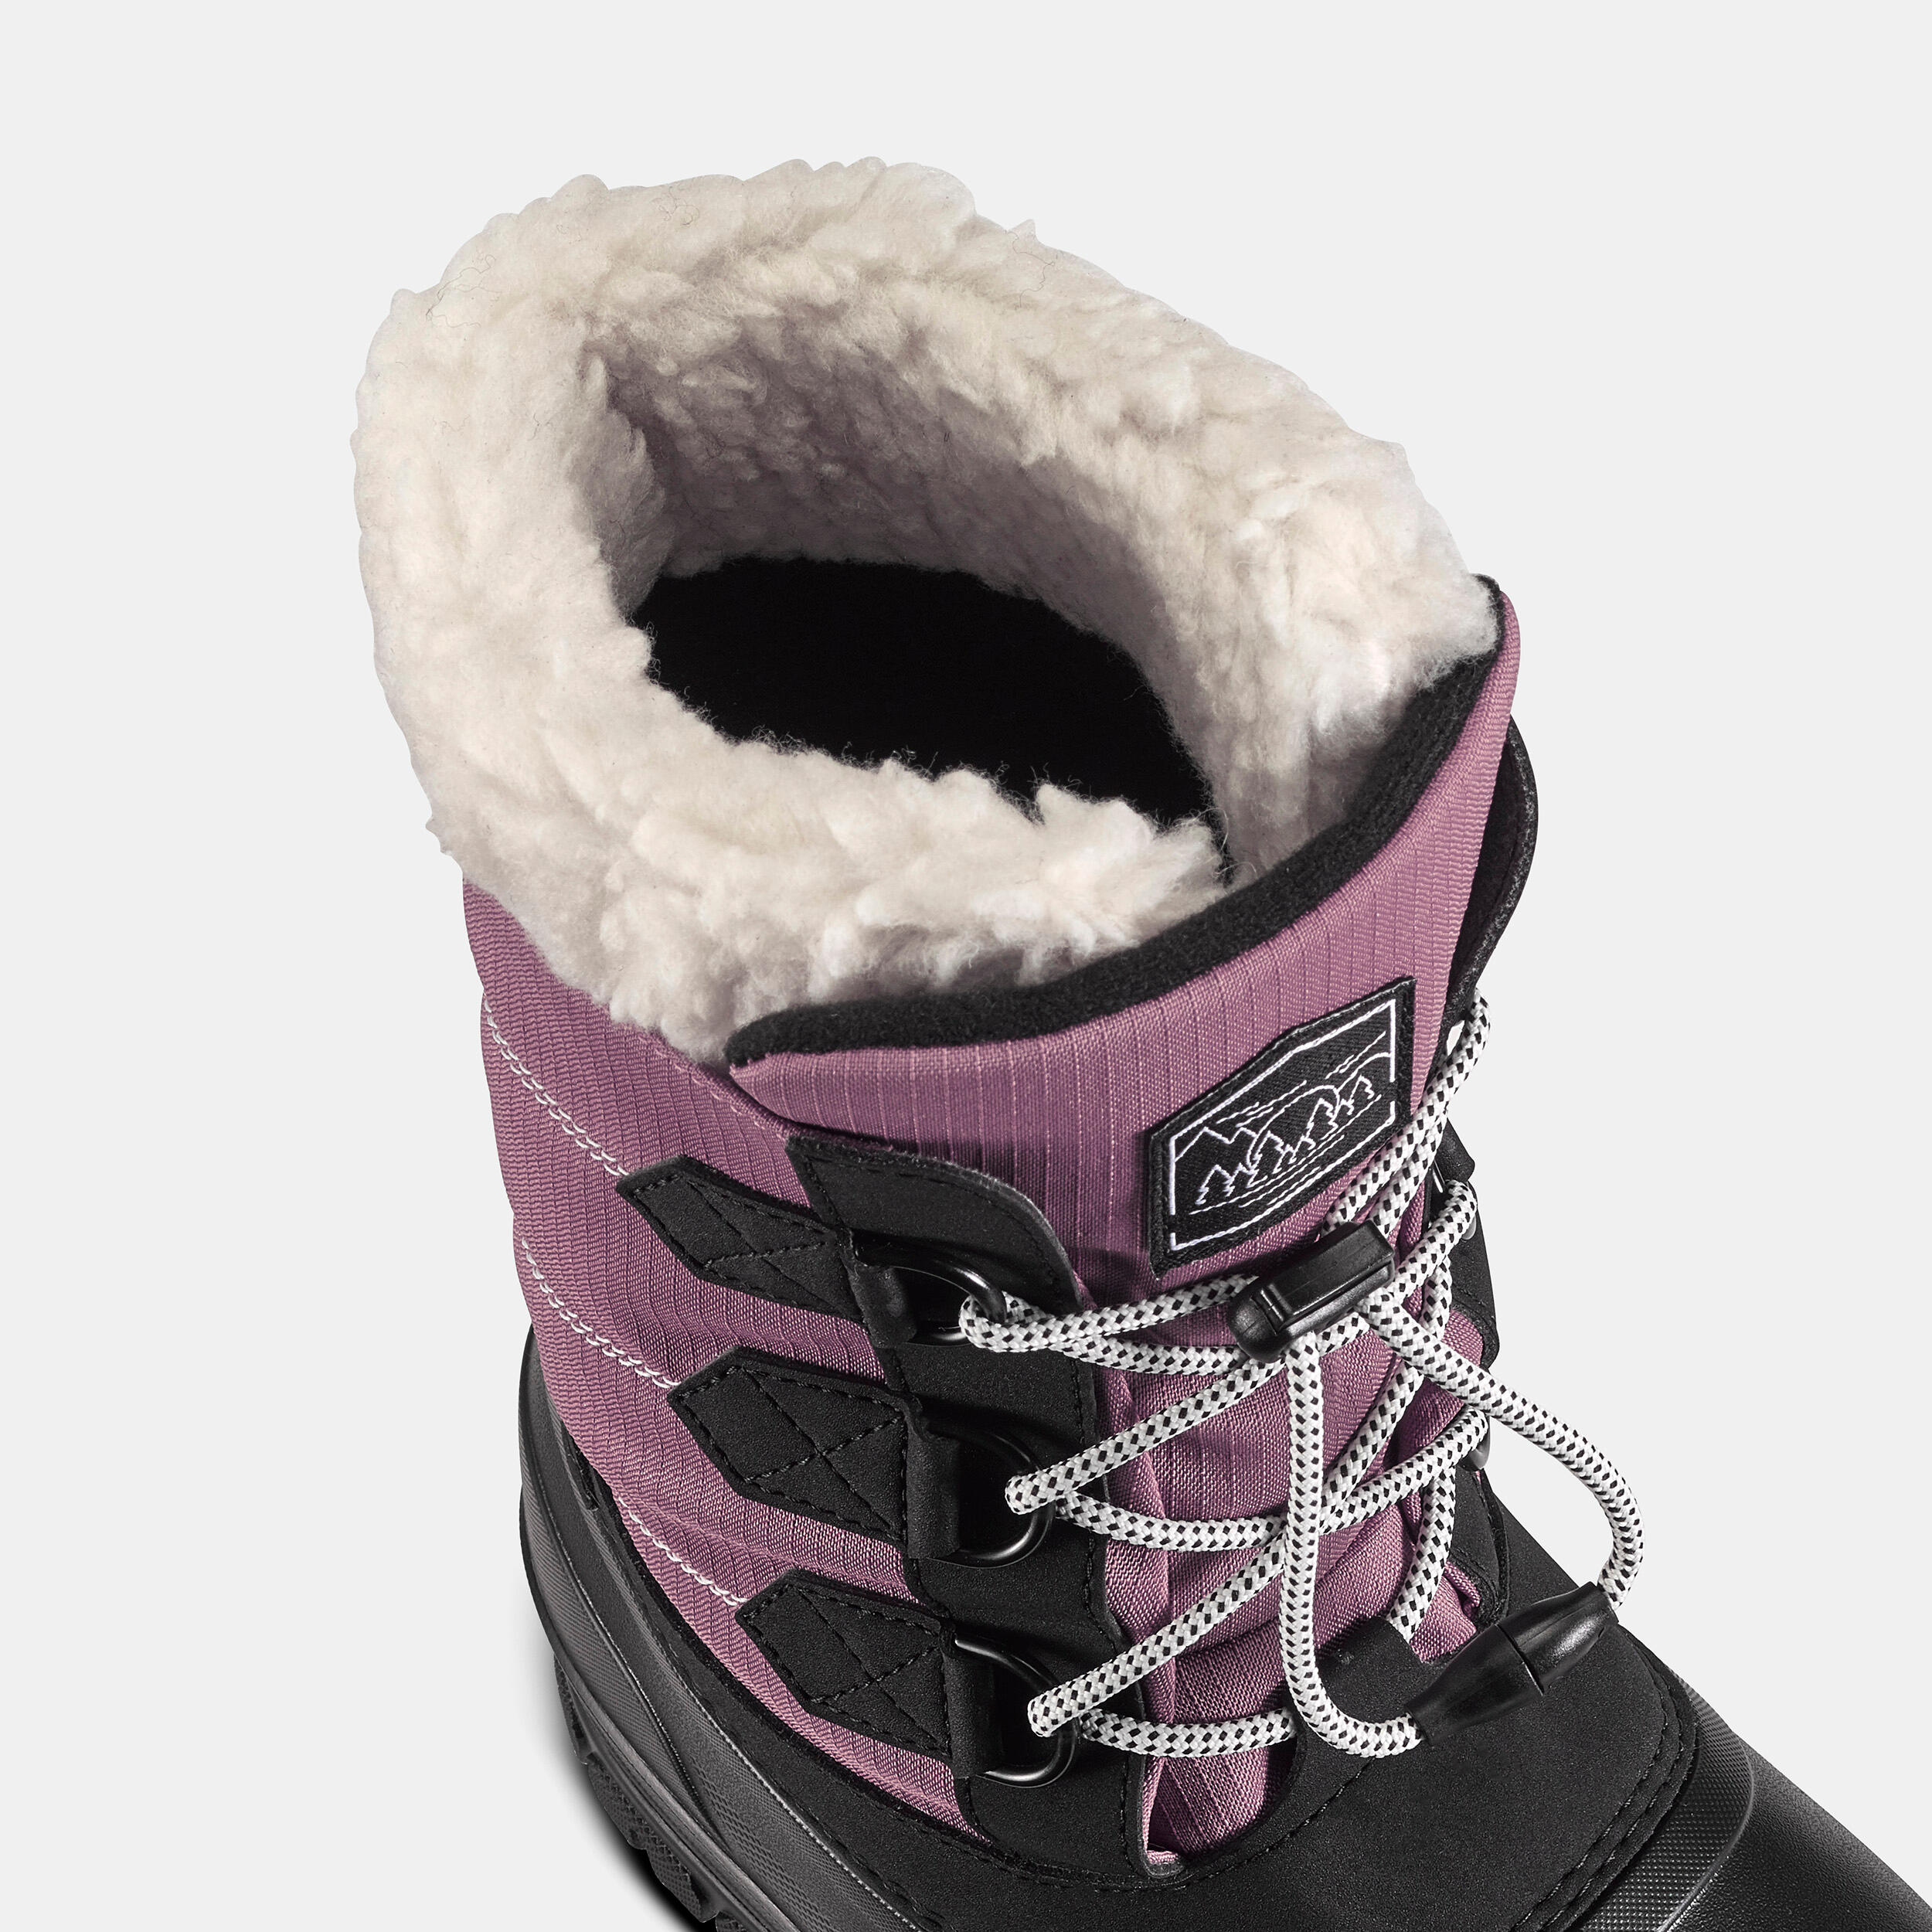 KIDS' WARM AND WATERPROOF HIKING SNOW BOOTS - SH900 - SIZE 11.5 TO 5.5 6/7